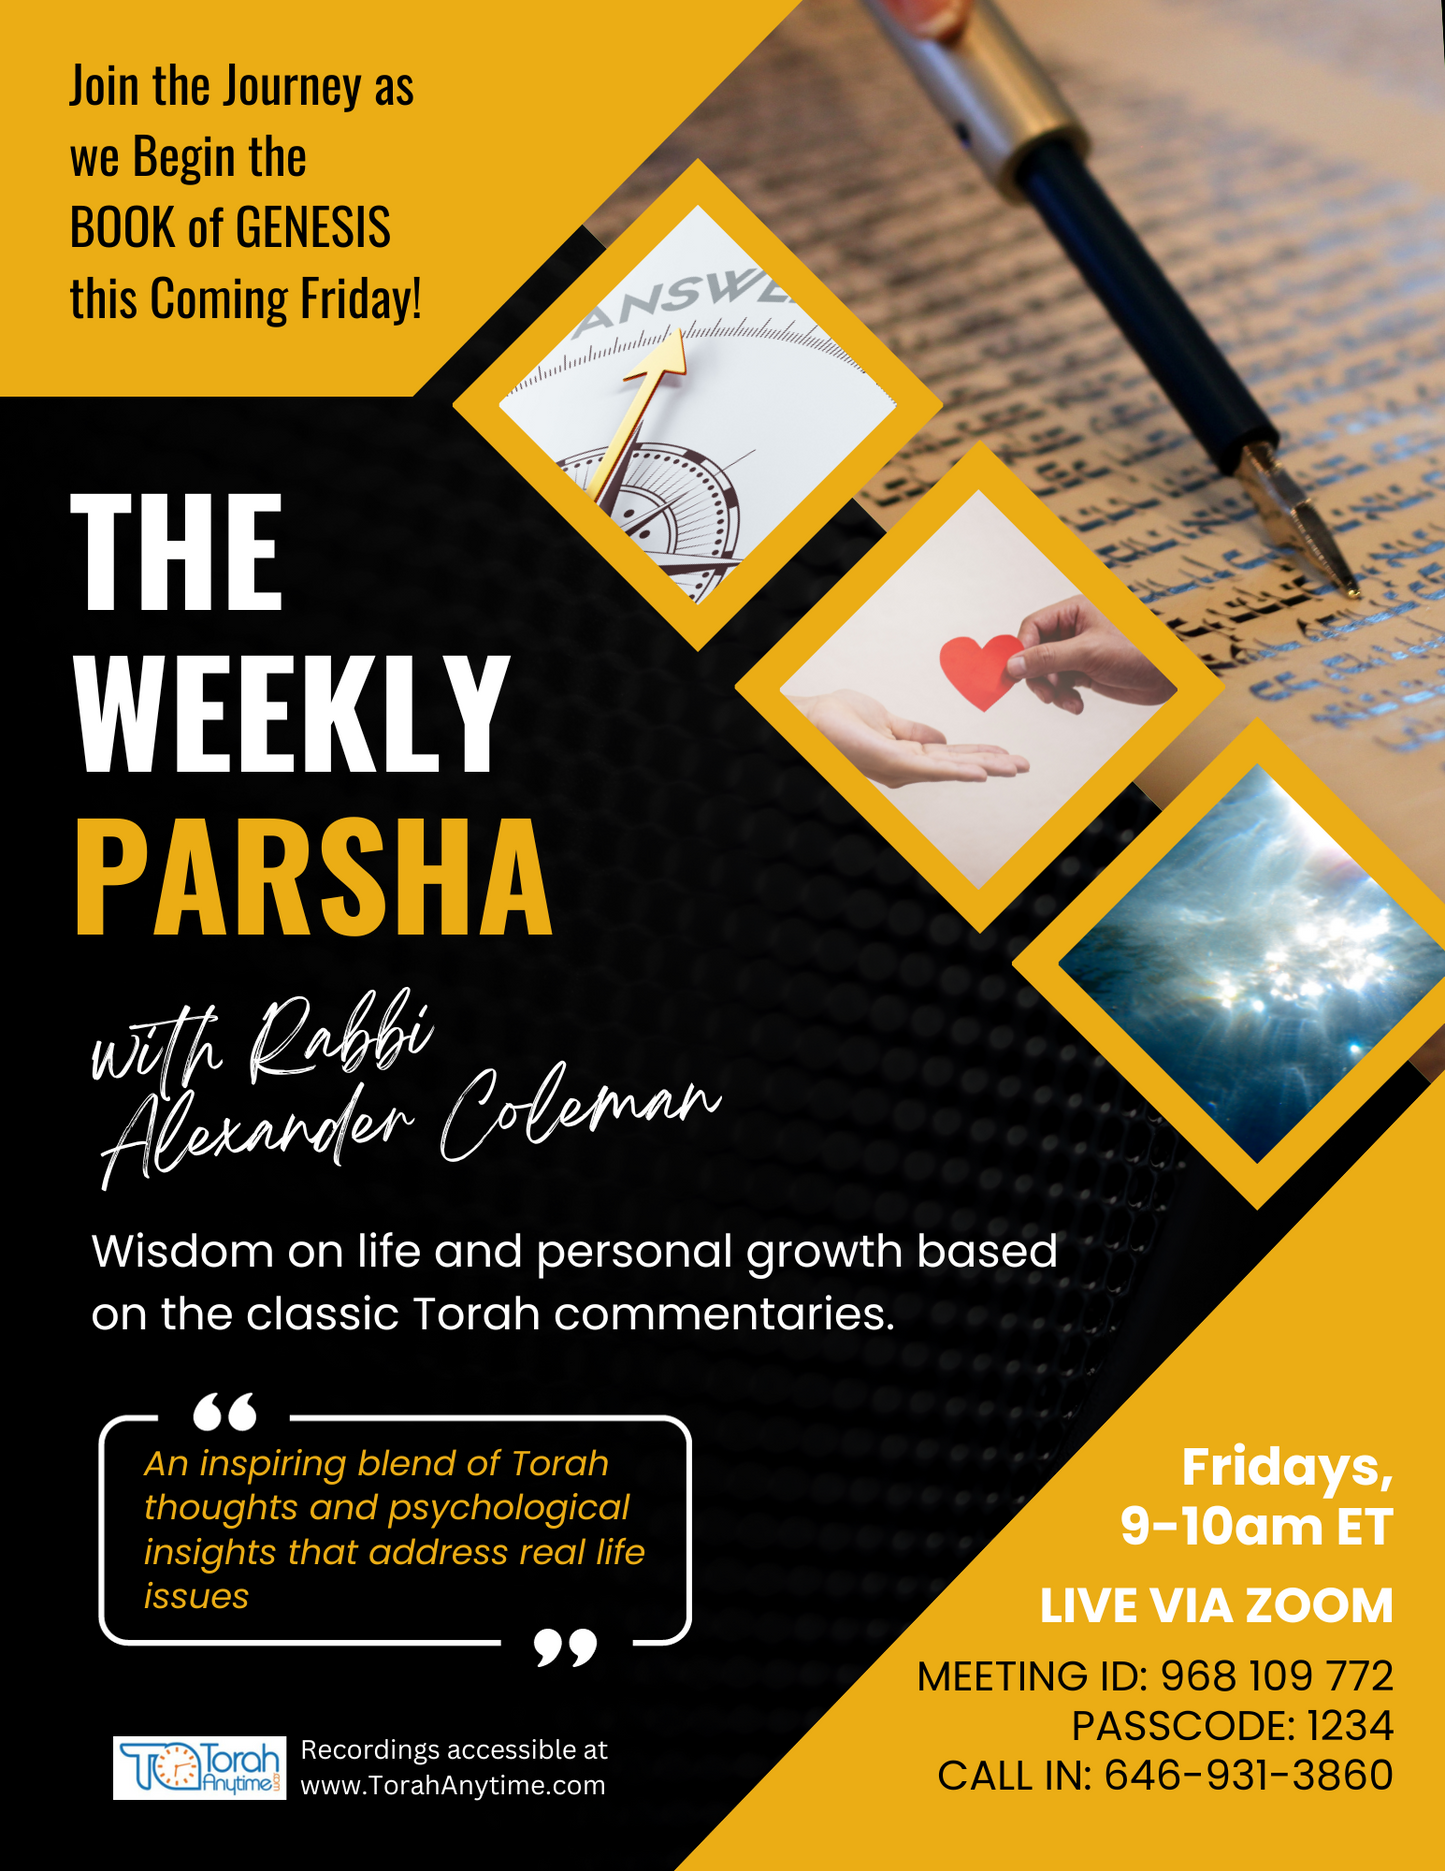 The Weekly Parsha